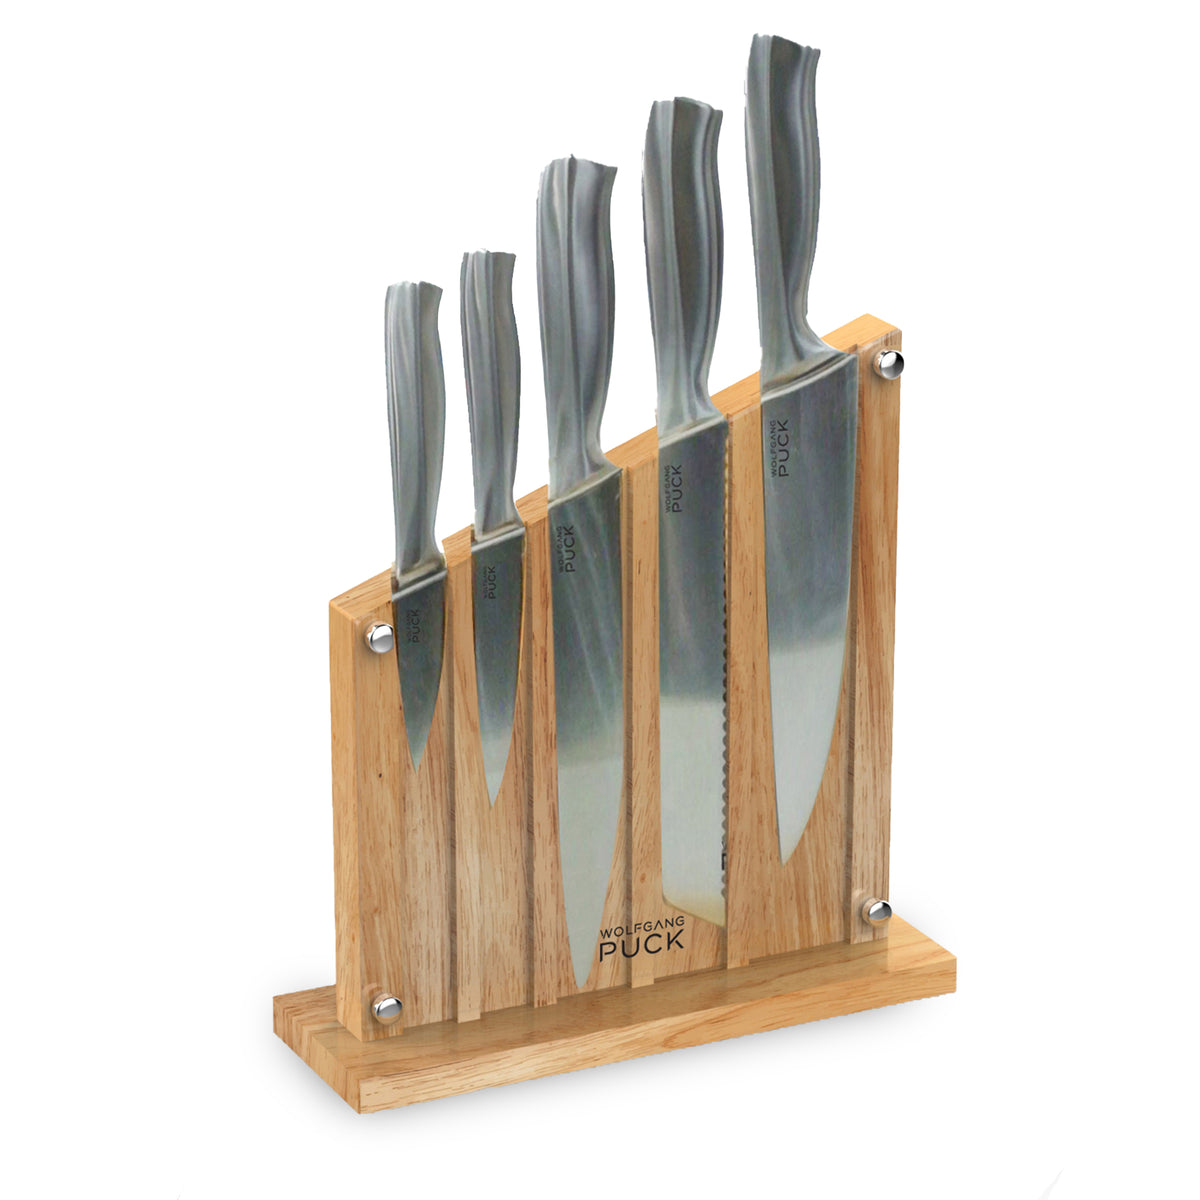 Commercial Chef 6 Piece High Carbon Stainless Steel Knife Block